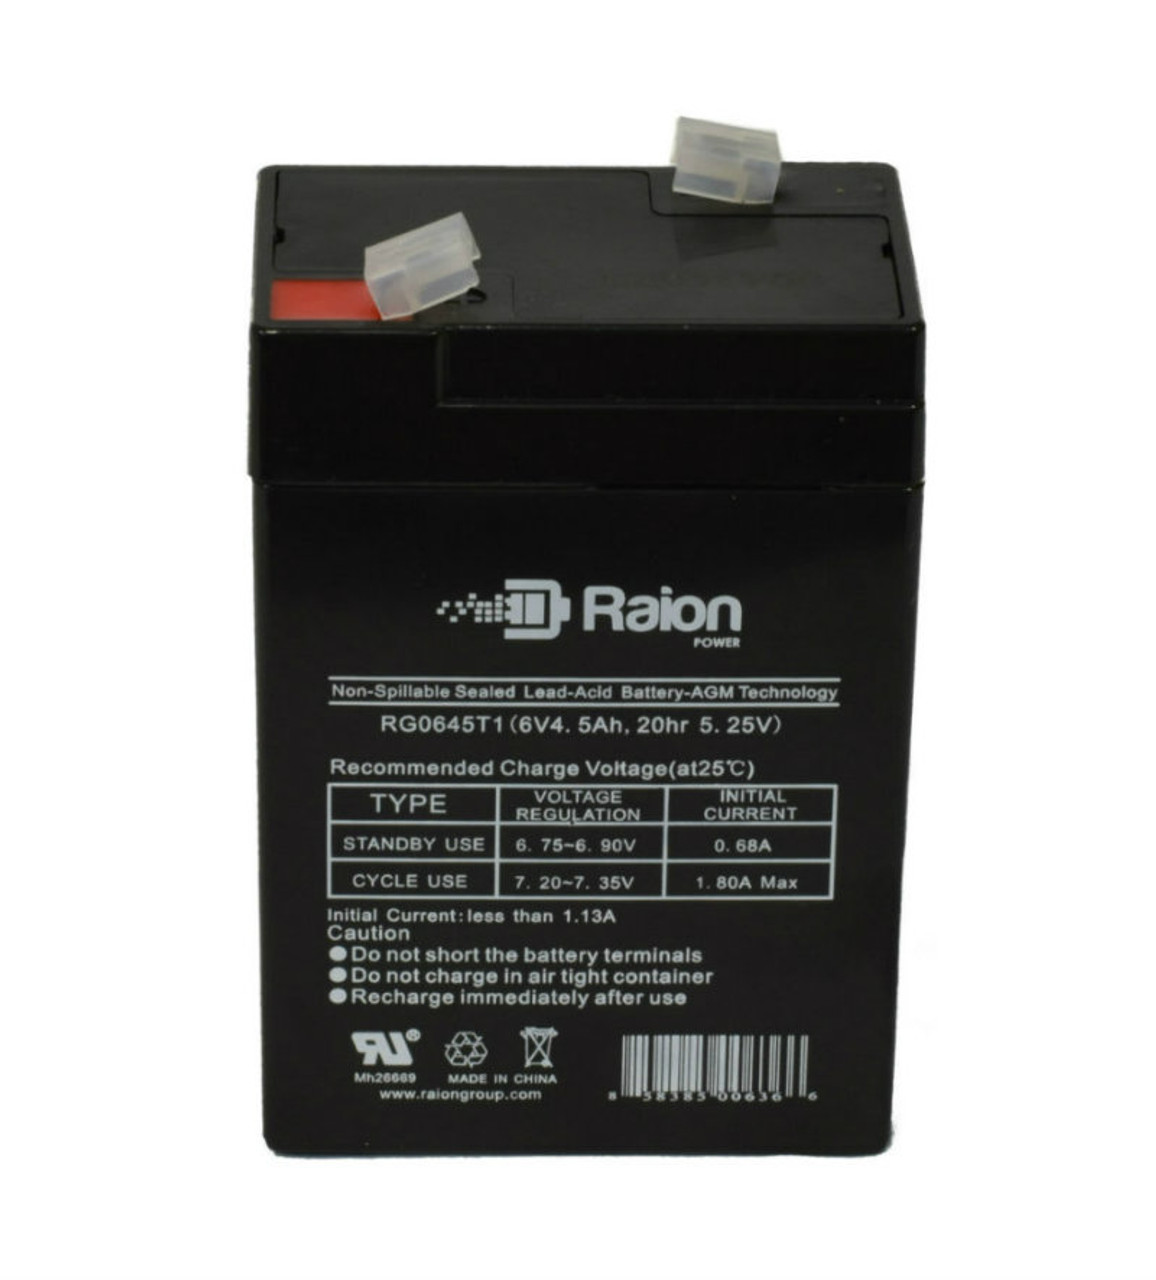 Raion Power RG0645T1 Replacement Battery Cartridge for Valen Topin 6 TP 5